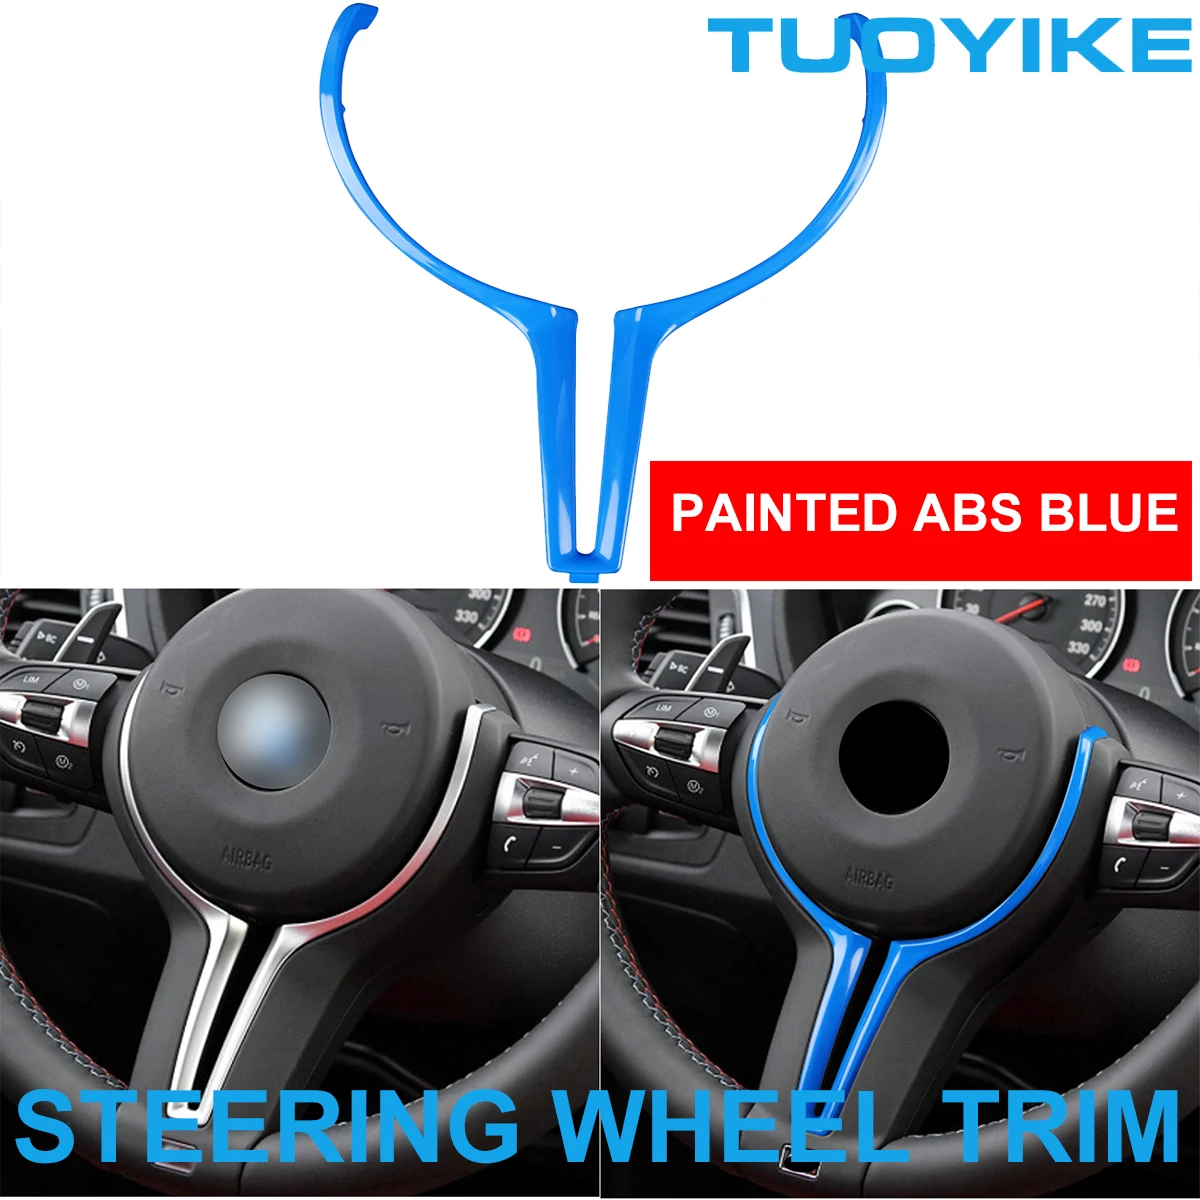 

Painted Blue ABS Car Steering Wheel Trim Cover Sticker Color-Coated For BMW M2 F87 M3 F80 M4 F83 F10 M5 F06 F12 F13 M6 2014-18